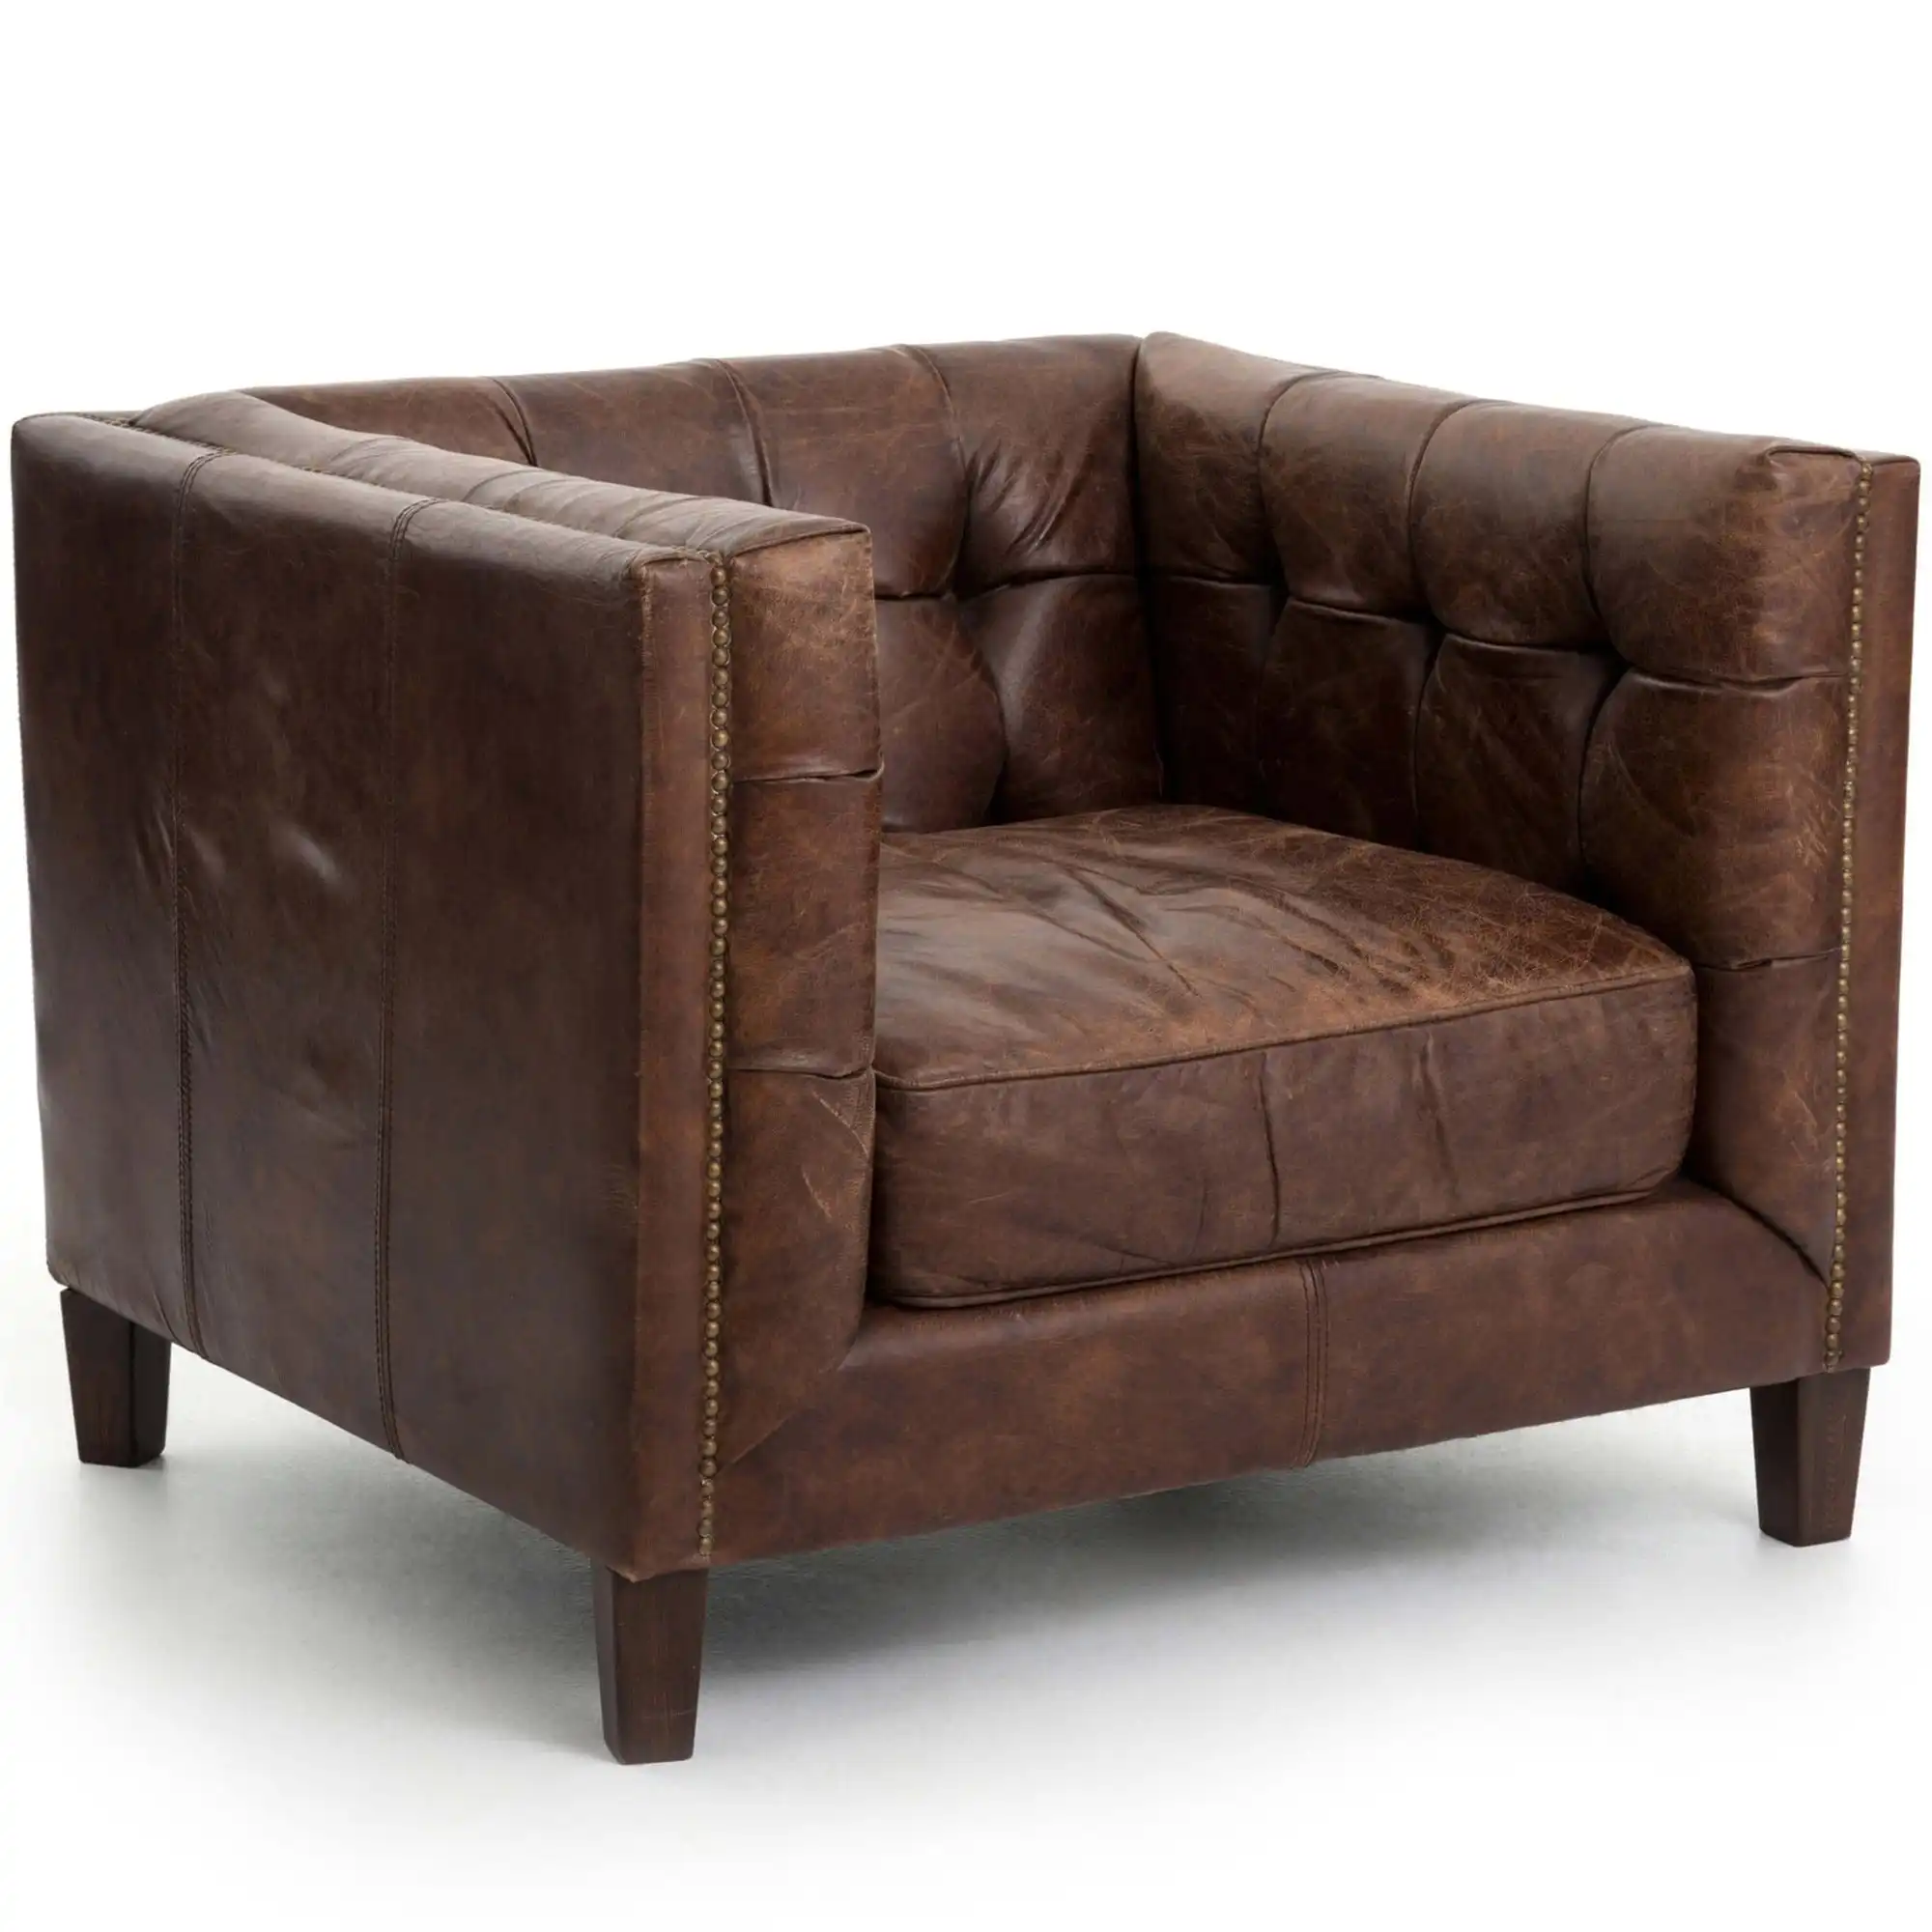 Modern Luxe Cigar Lounge Leather One Seater Sofa For Home Living Room And Hotel Restaurant